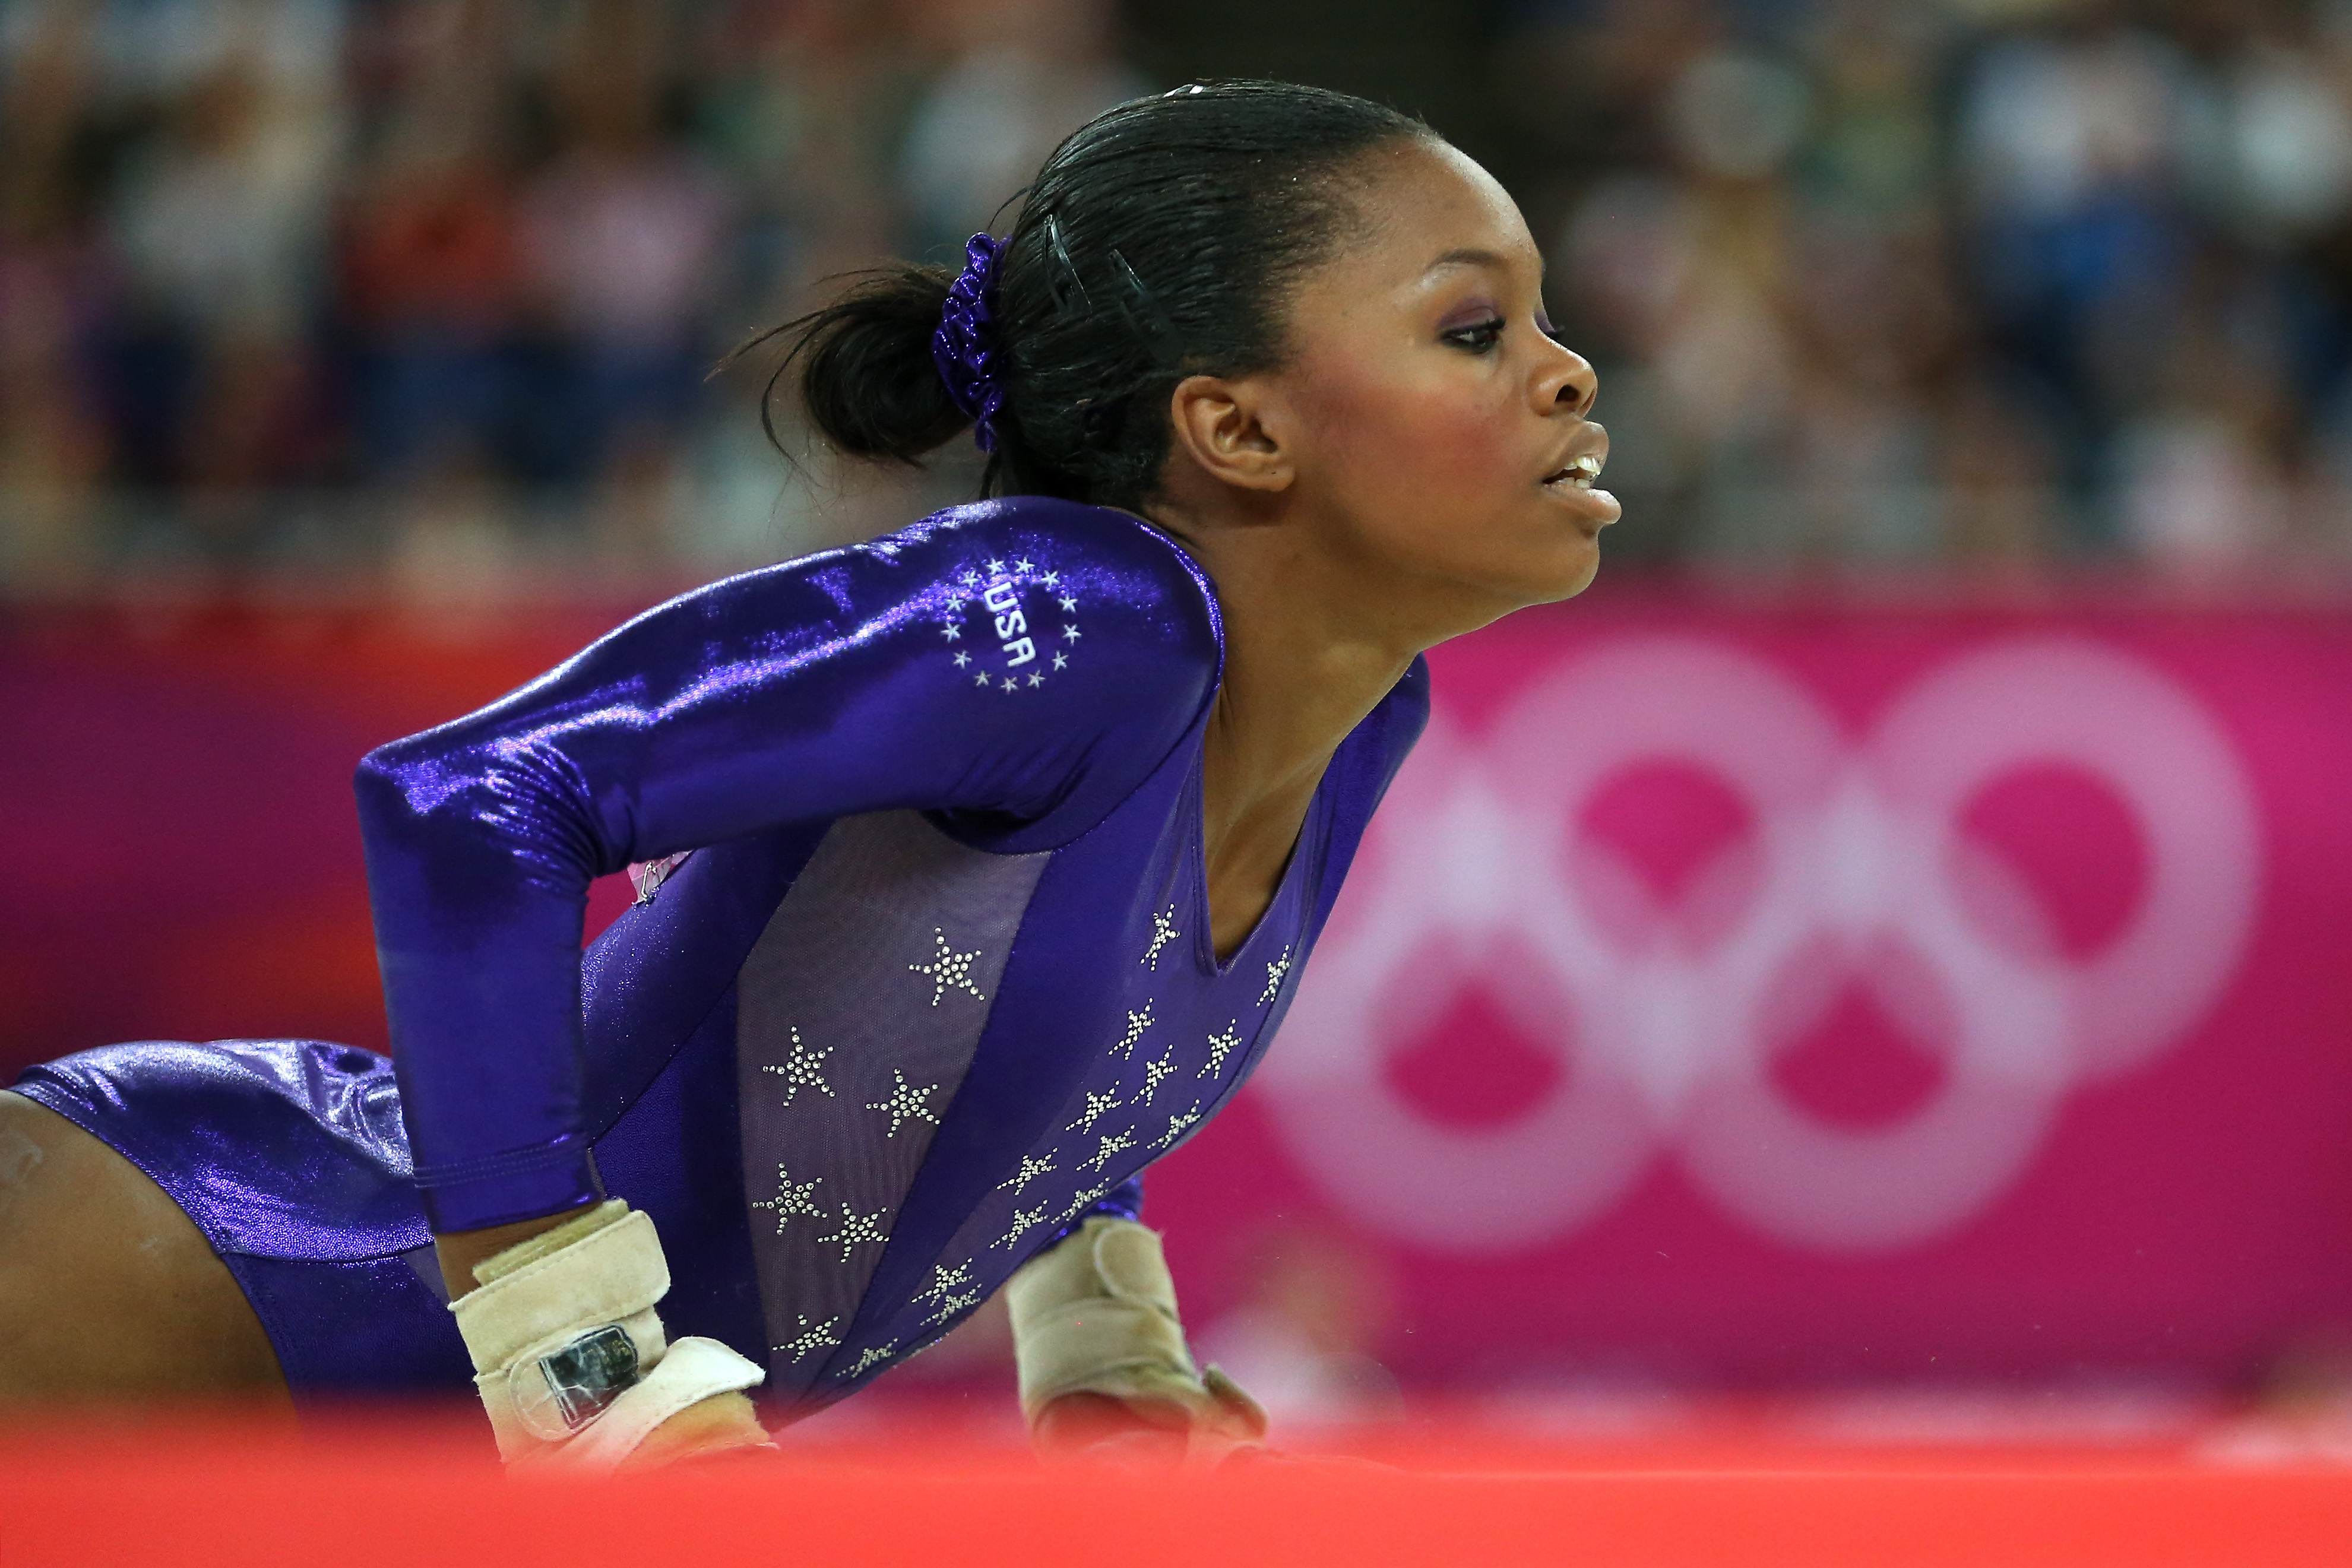 Gabrielle Douglas of the United States competes in the floor exercise in the Artistic Gymnastics Women's Team qualification on Day 2 of the London 2012 Olympic Games at North Greenwich Arena on July 29, 2012 in London, England. | Source: Getty Images